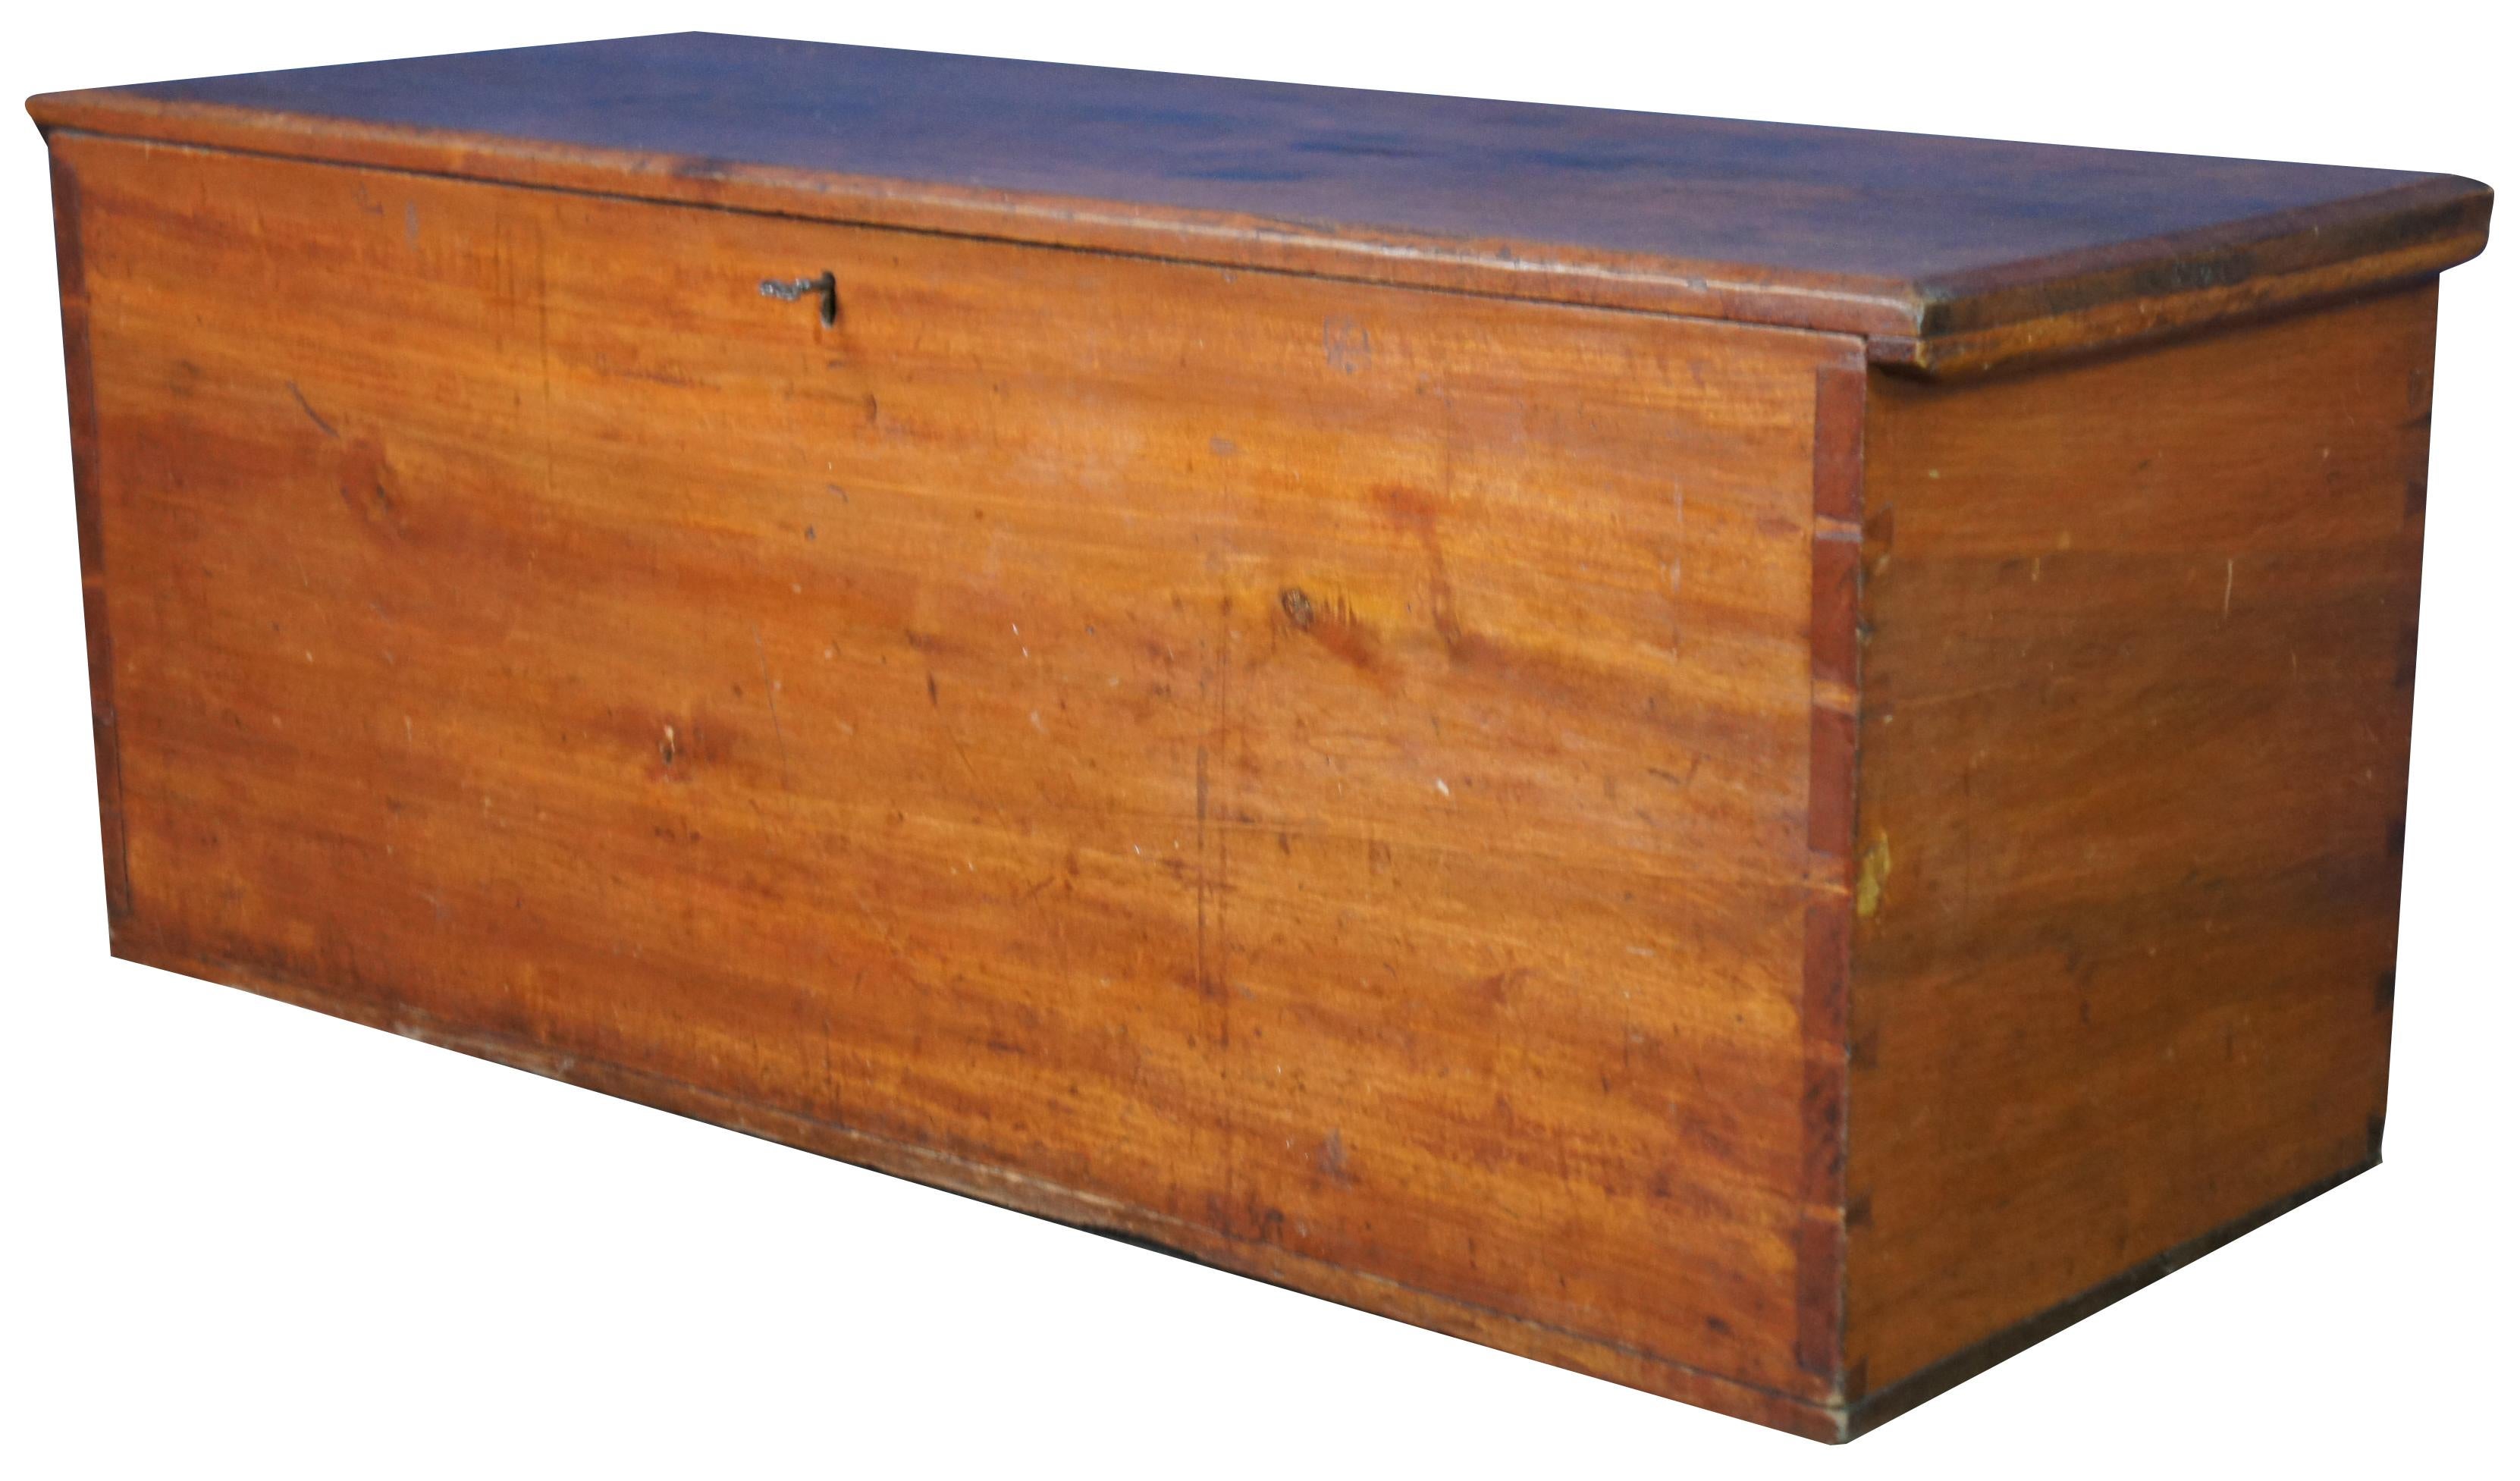 Antique country pine blanket trunk or hope chest, circa 1830s. Features primitive styling with hand dovetailing, lock and key. Measure: 43